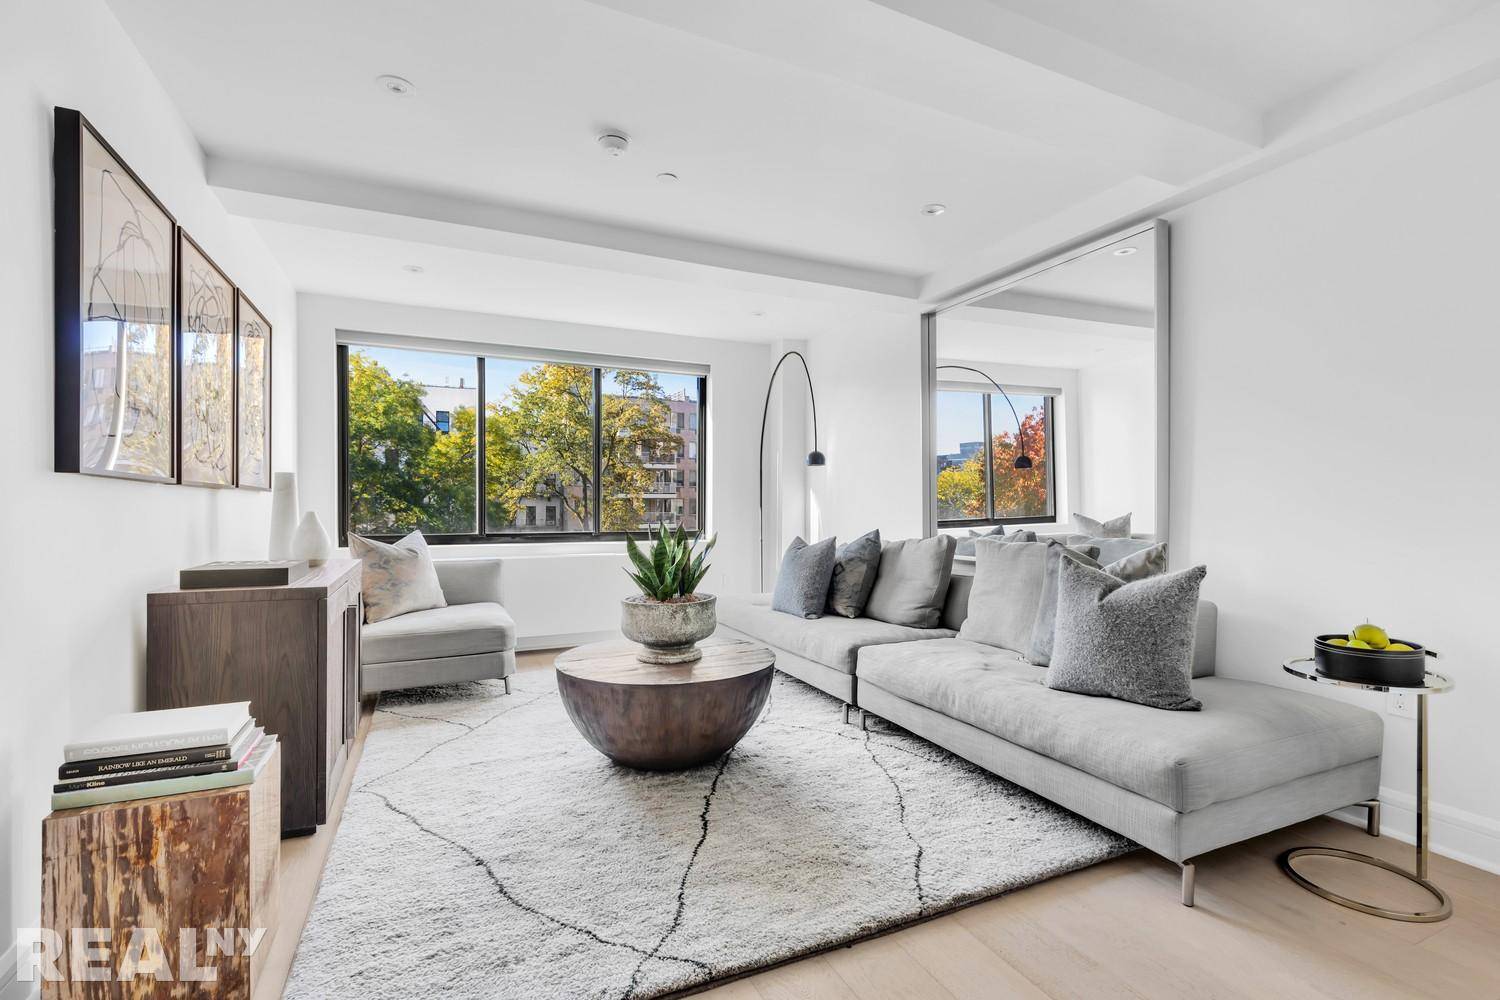 FOR IMMEDIATE OCCUPANCYBe the FIRST to own this stunning East Village residence !